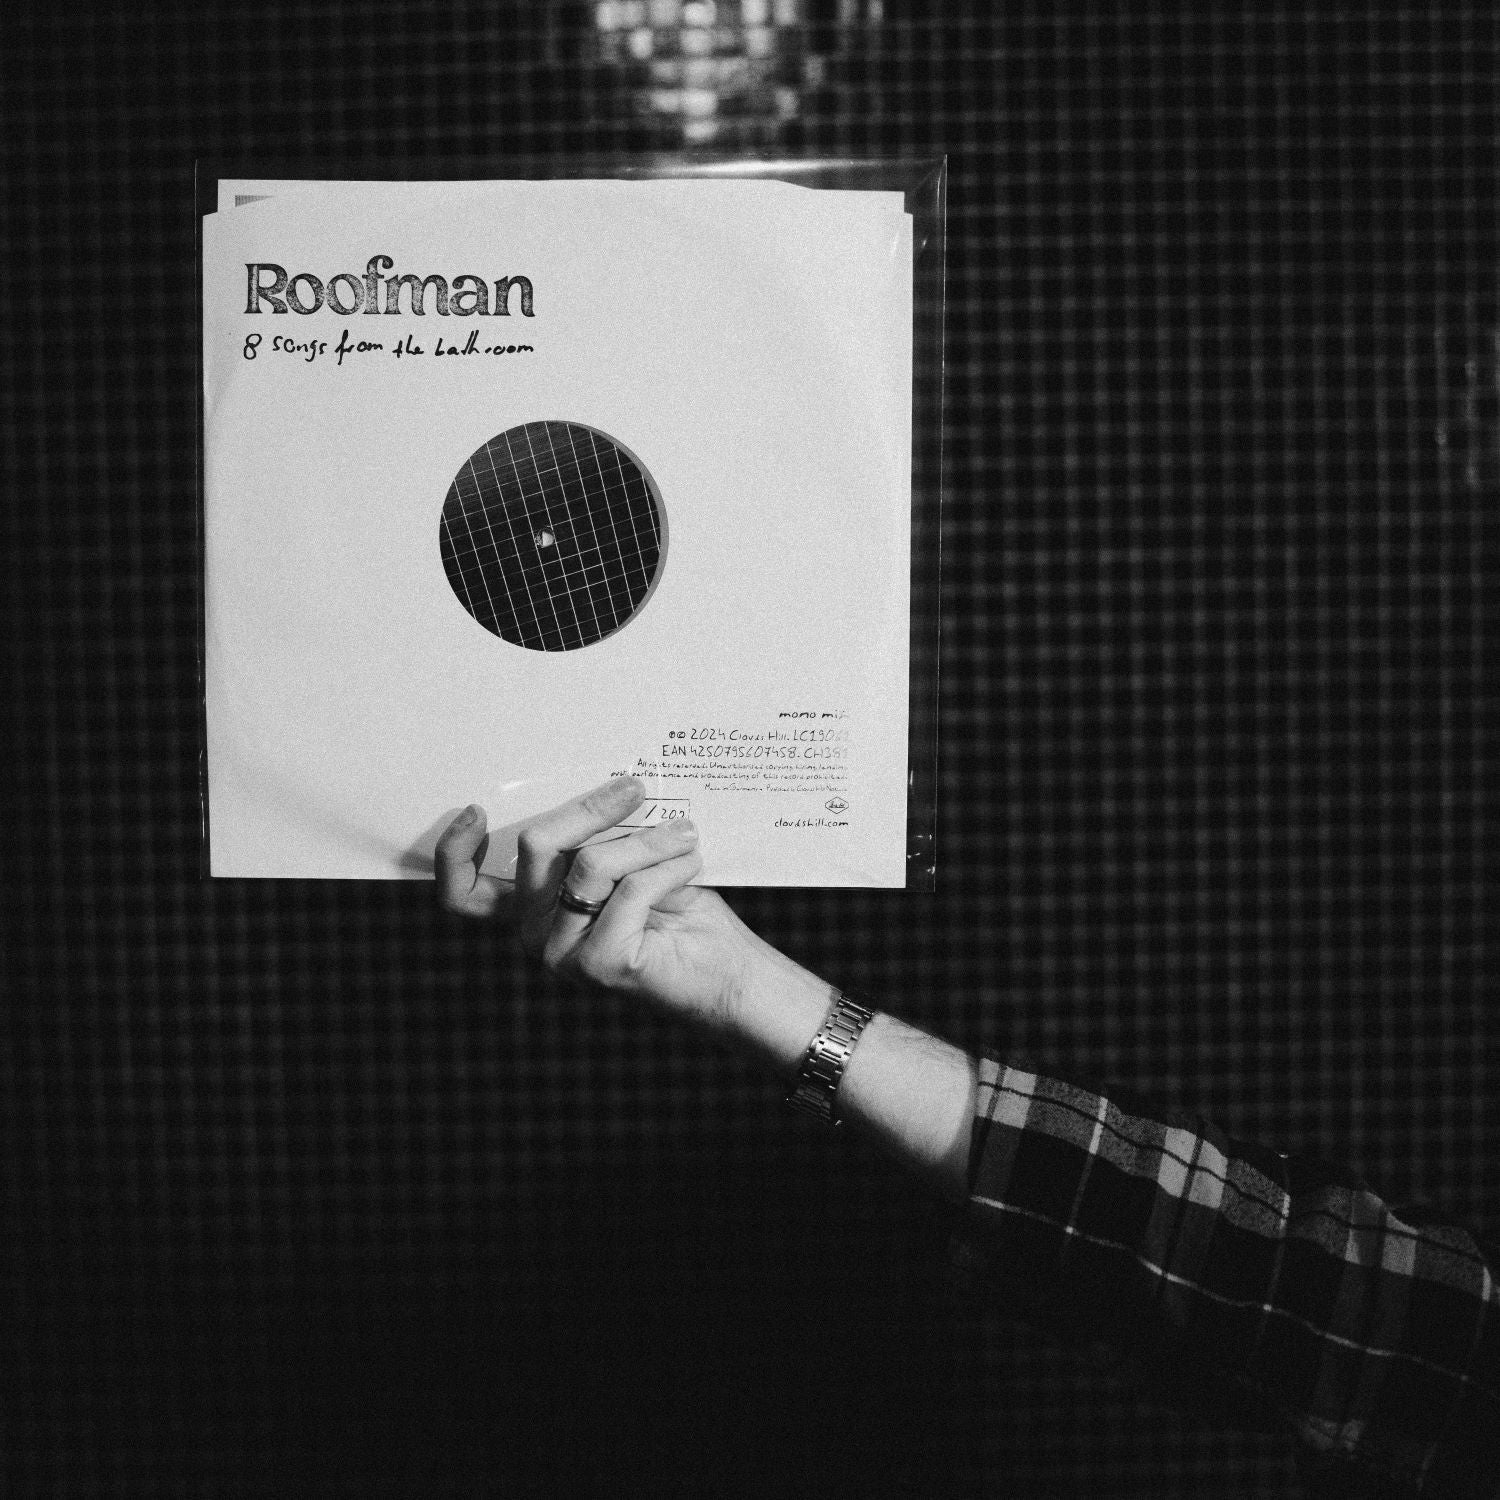 Roofman - 8 songs from the bathroom - 12"